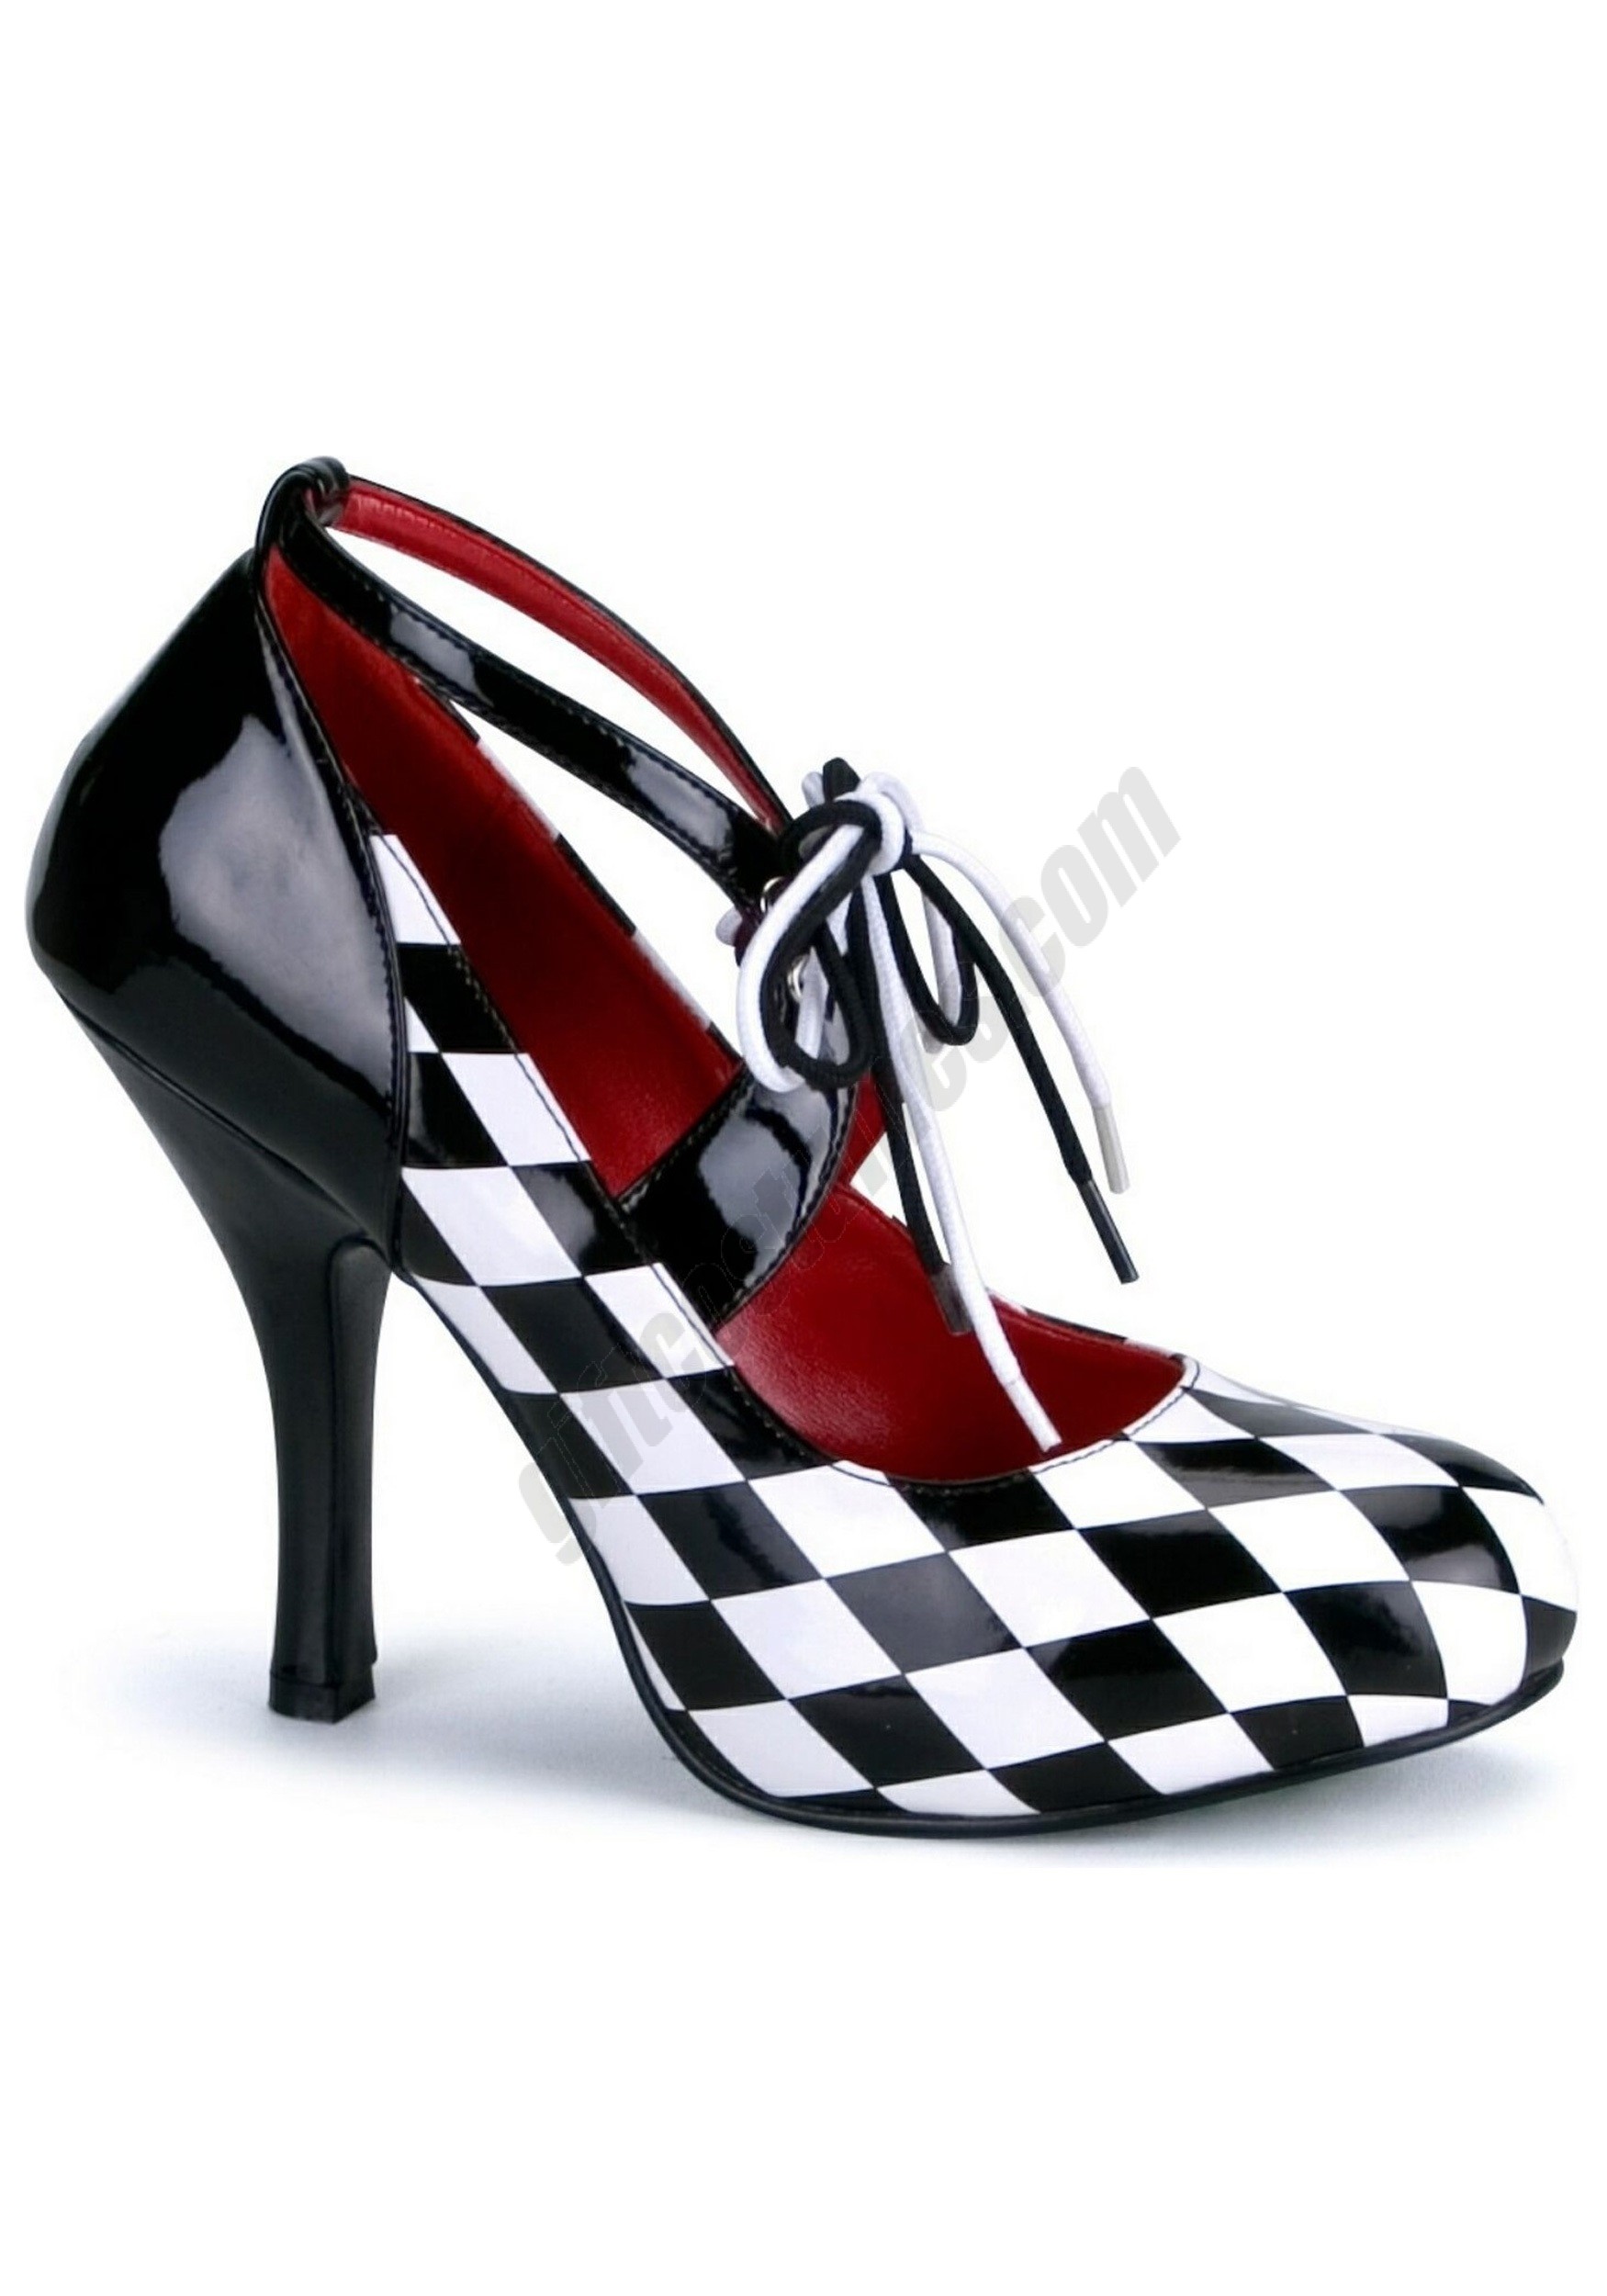 Womens Harlequin Shoes Promotions - Womens Harlequin Shoes Promotions